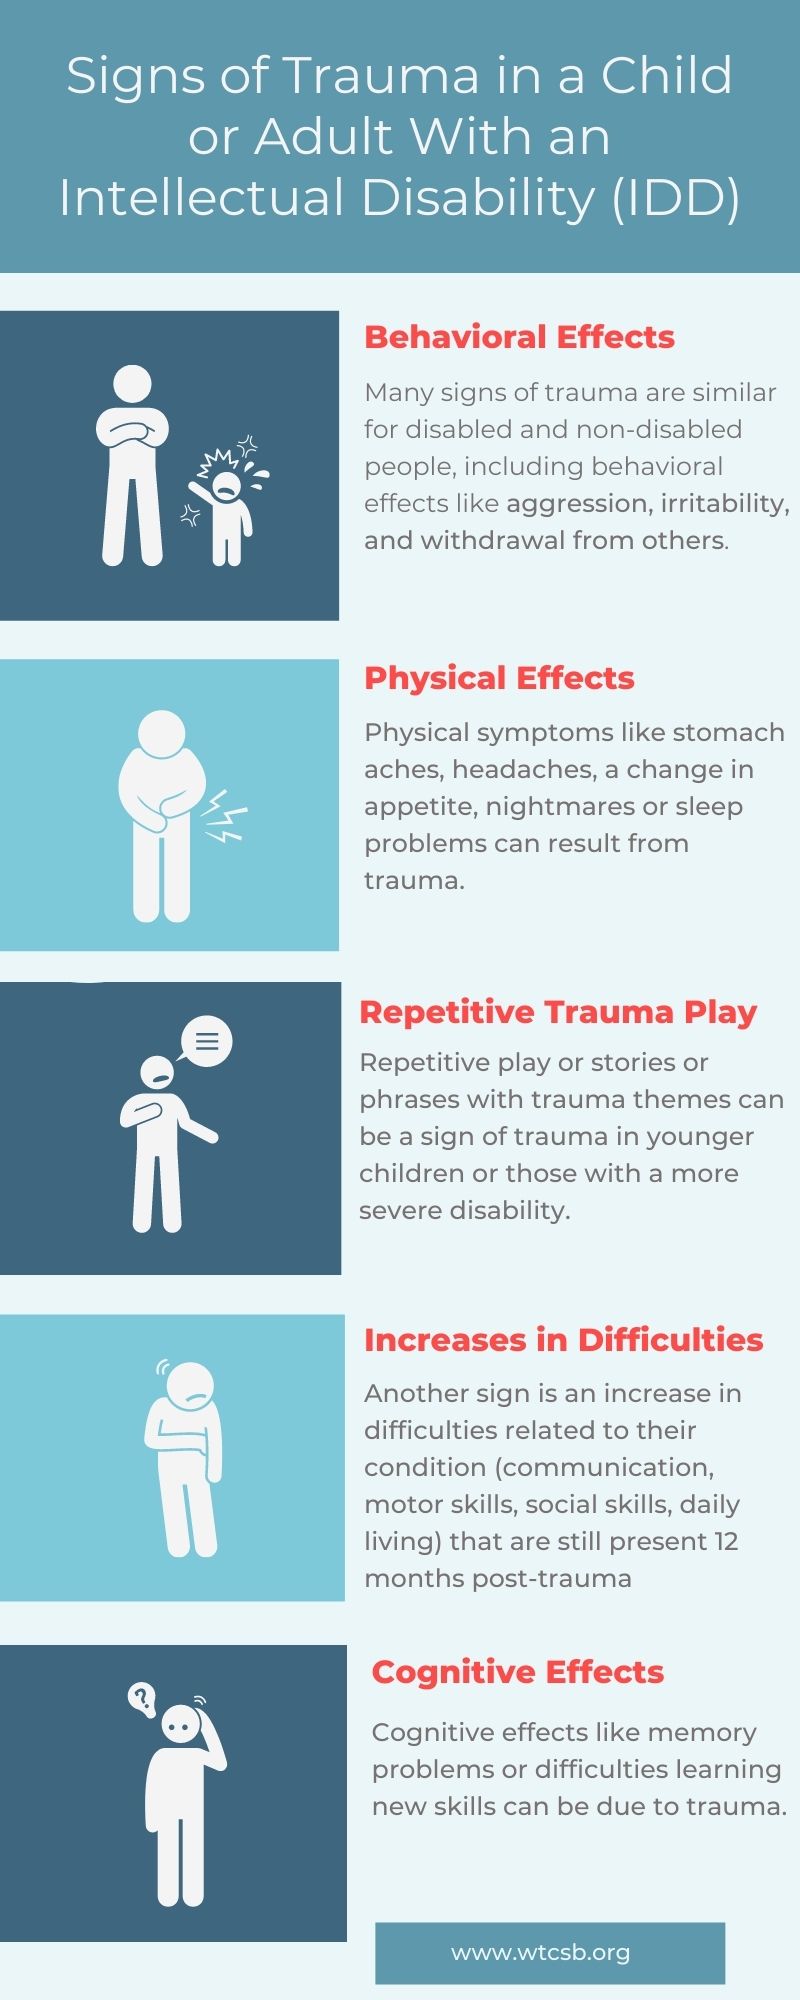 infographic - Signs of Trauma in a Child or Adult With an Intellectual Disability Infographic